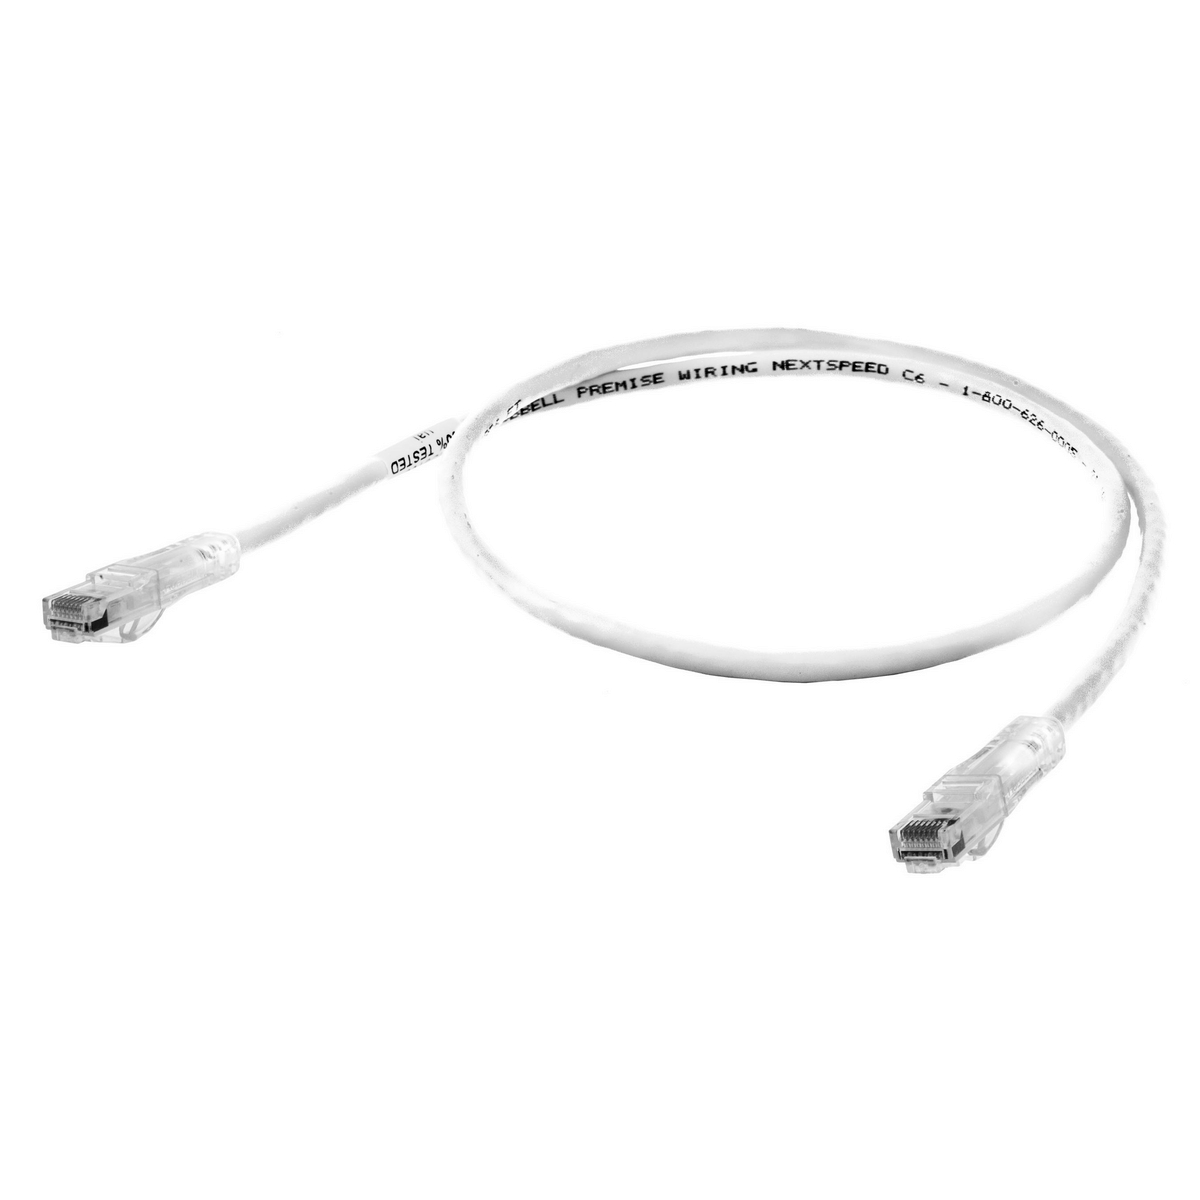 Patch cord, Cat6, Slim, White, 3 Ft